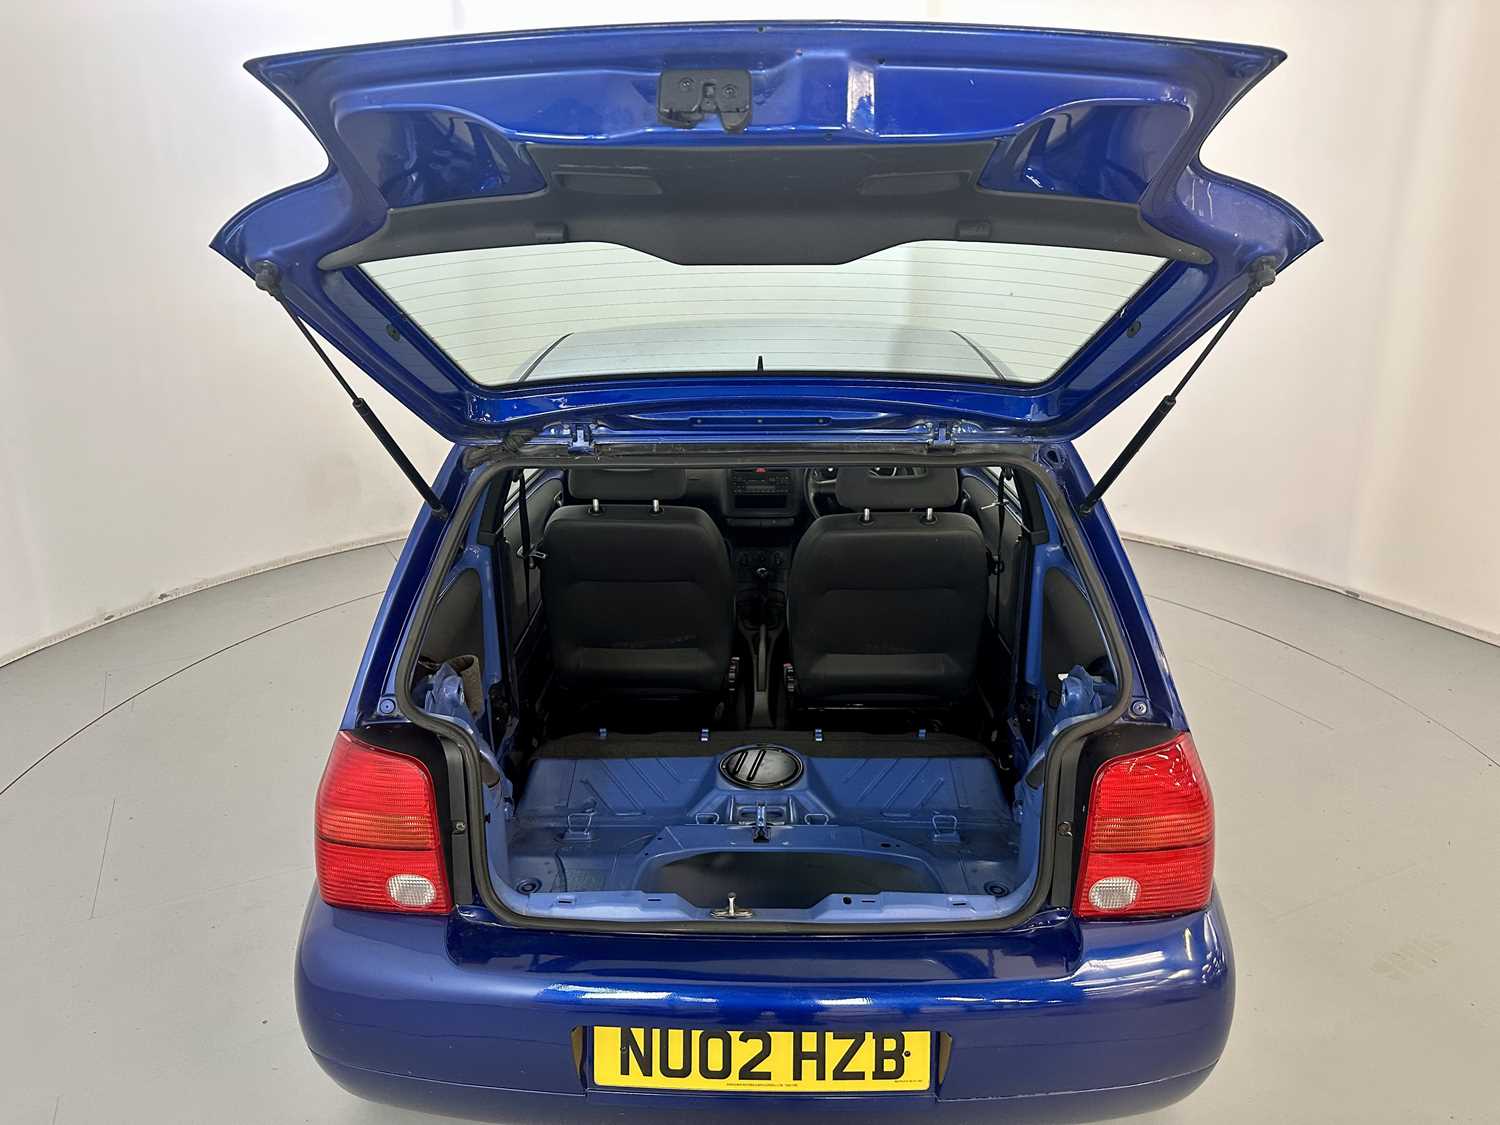 2002 Volkswagen Lupo - Image 25 of 28